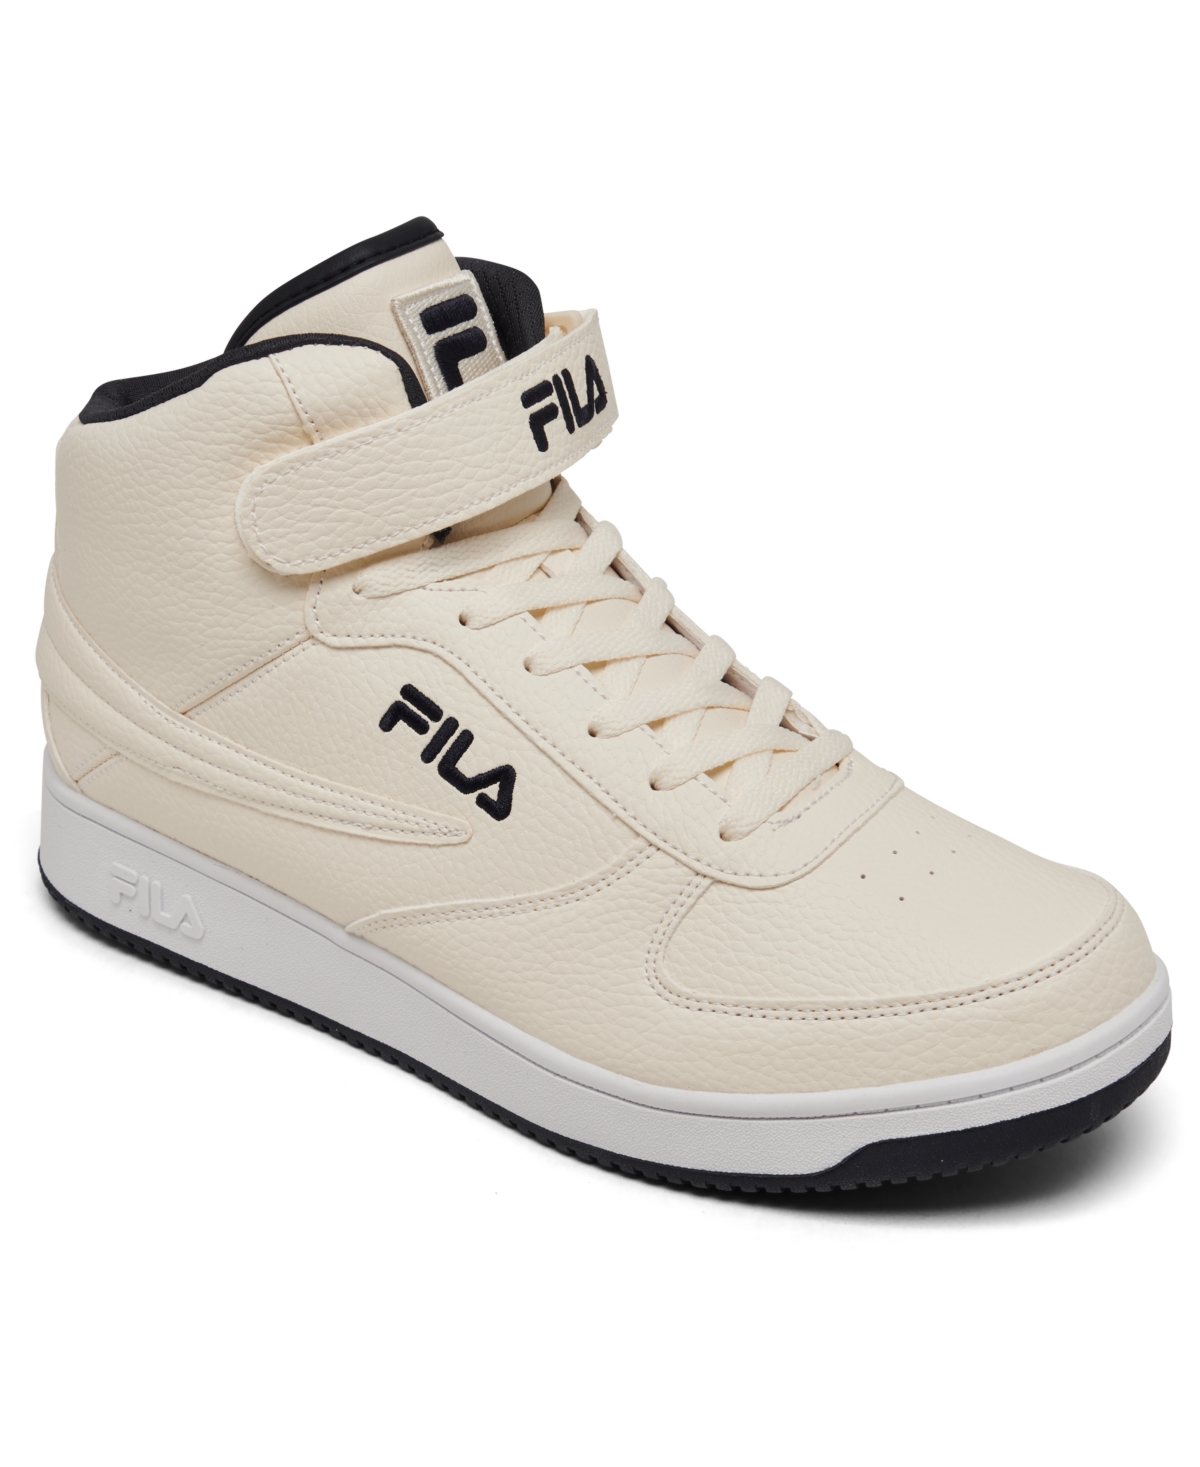 Men's A-High Strappy High Top Casual Sneakers from Finish Line - Gardenia